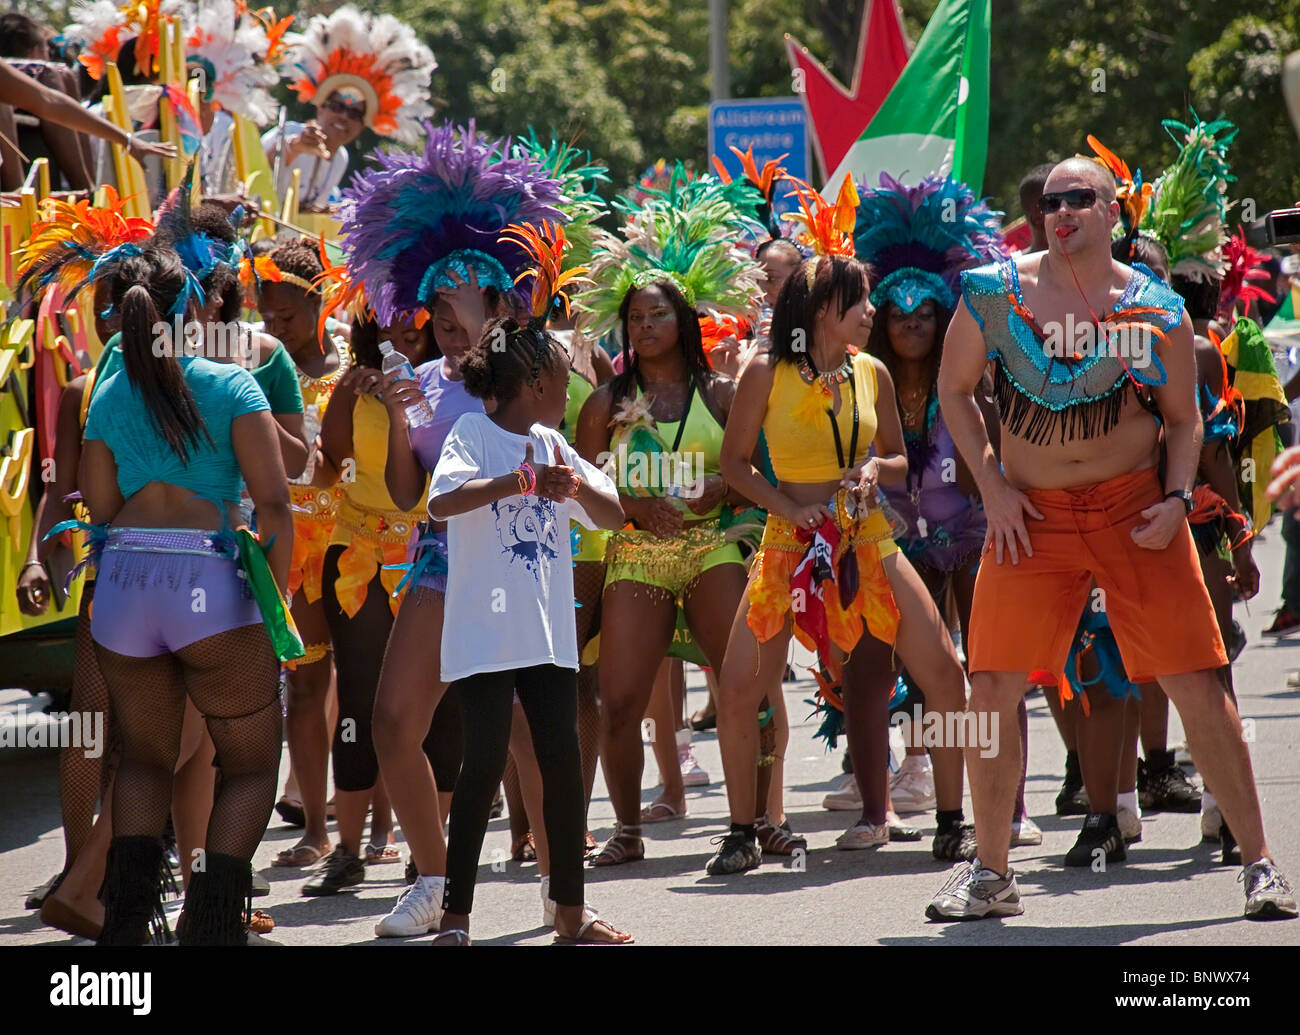 Group of unidentified Caribana participants in colorful dresses during the main parade on July 31, 2010 in Toronto Stock Photo